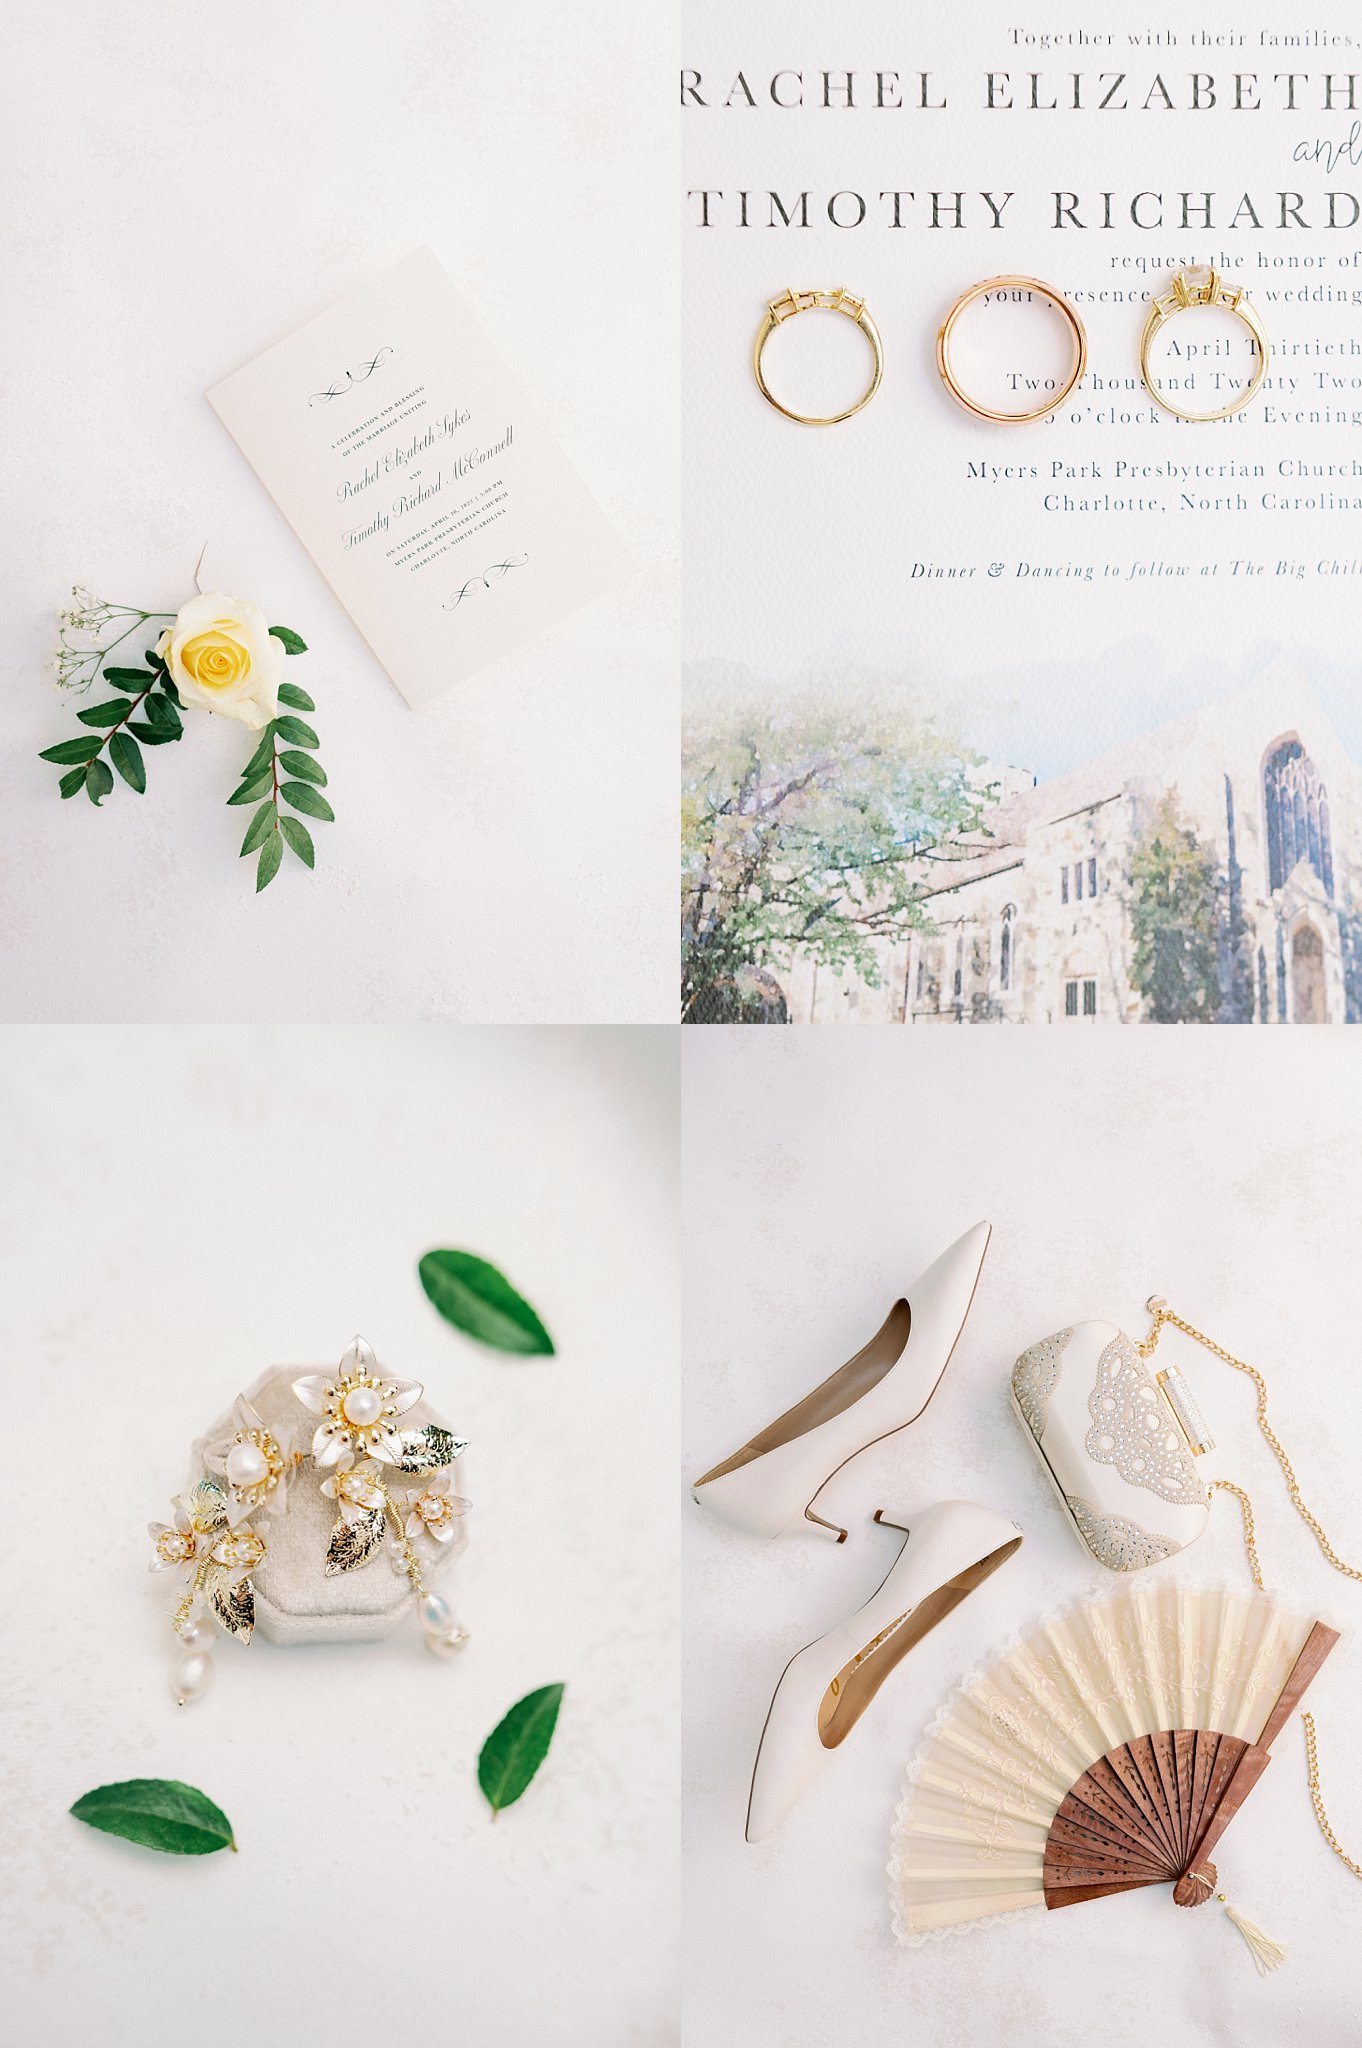 Bridal details at Charlotte wedding Myers Park Presbyterian Church and The Big Chill